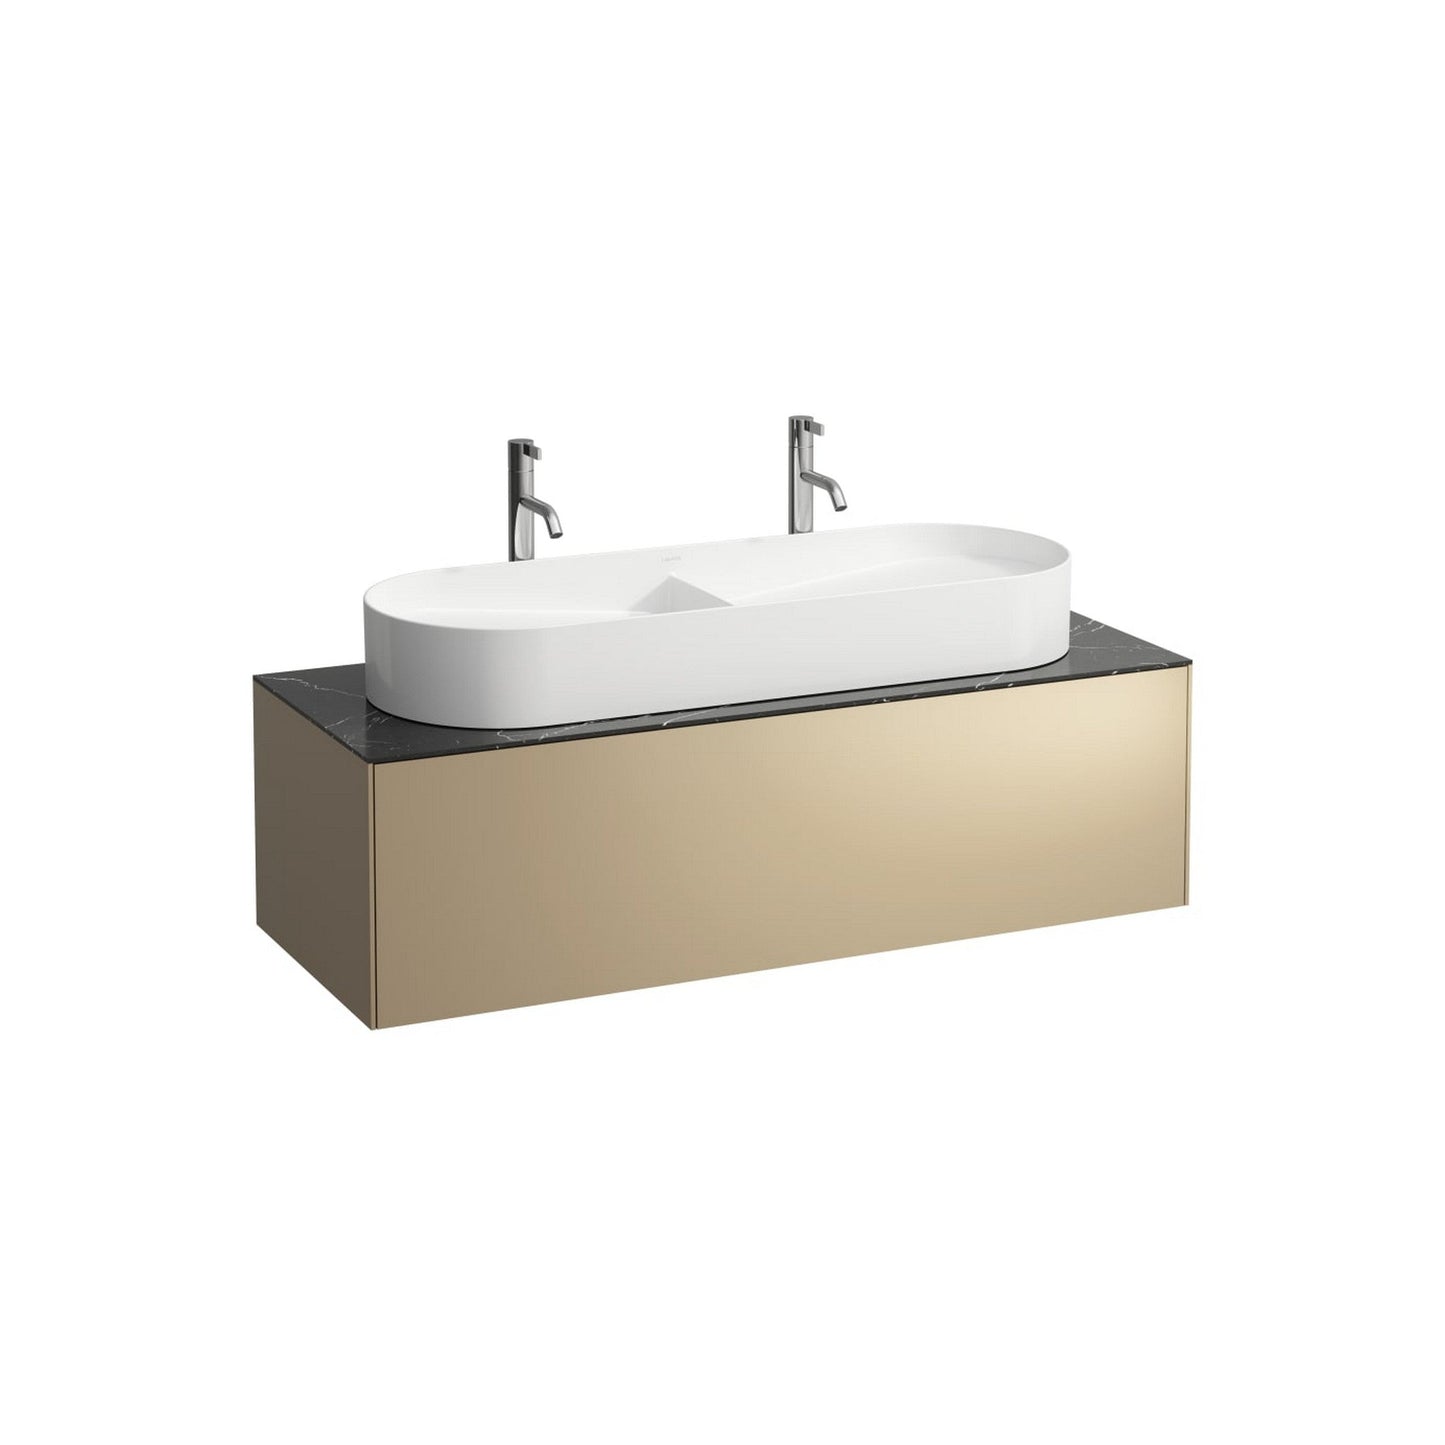 Laufen Sonar 46" 1-Drawer Gold Wall-Mounted Vanity With Nero Marquina Marble Top, Center Sink Cut-out for Sonar Bathroom Sink Model: H812348, H812349